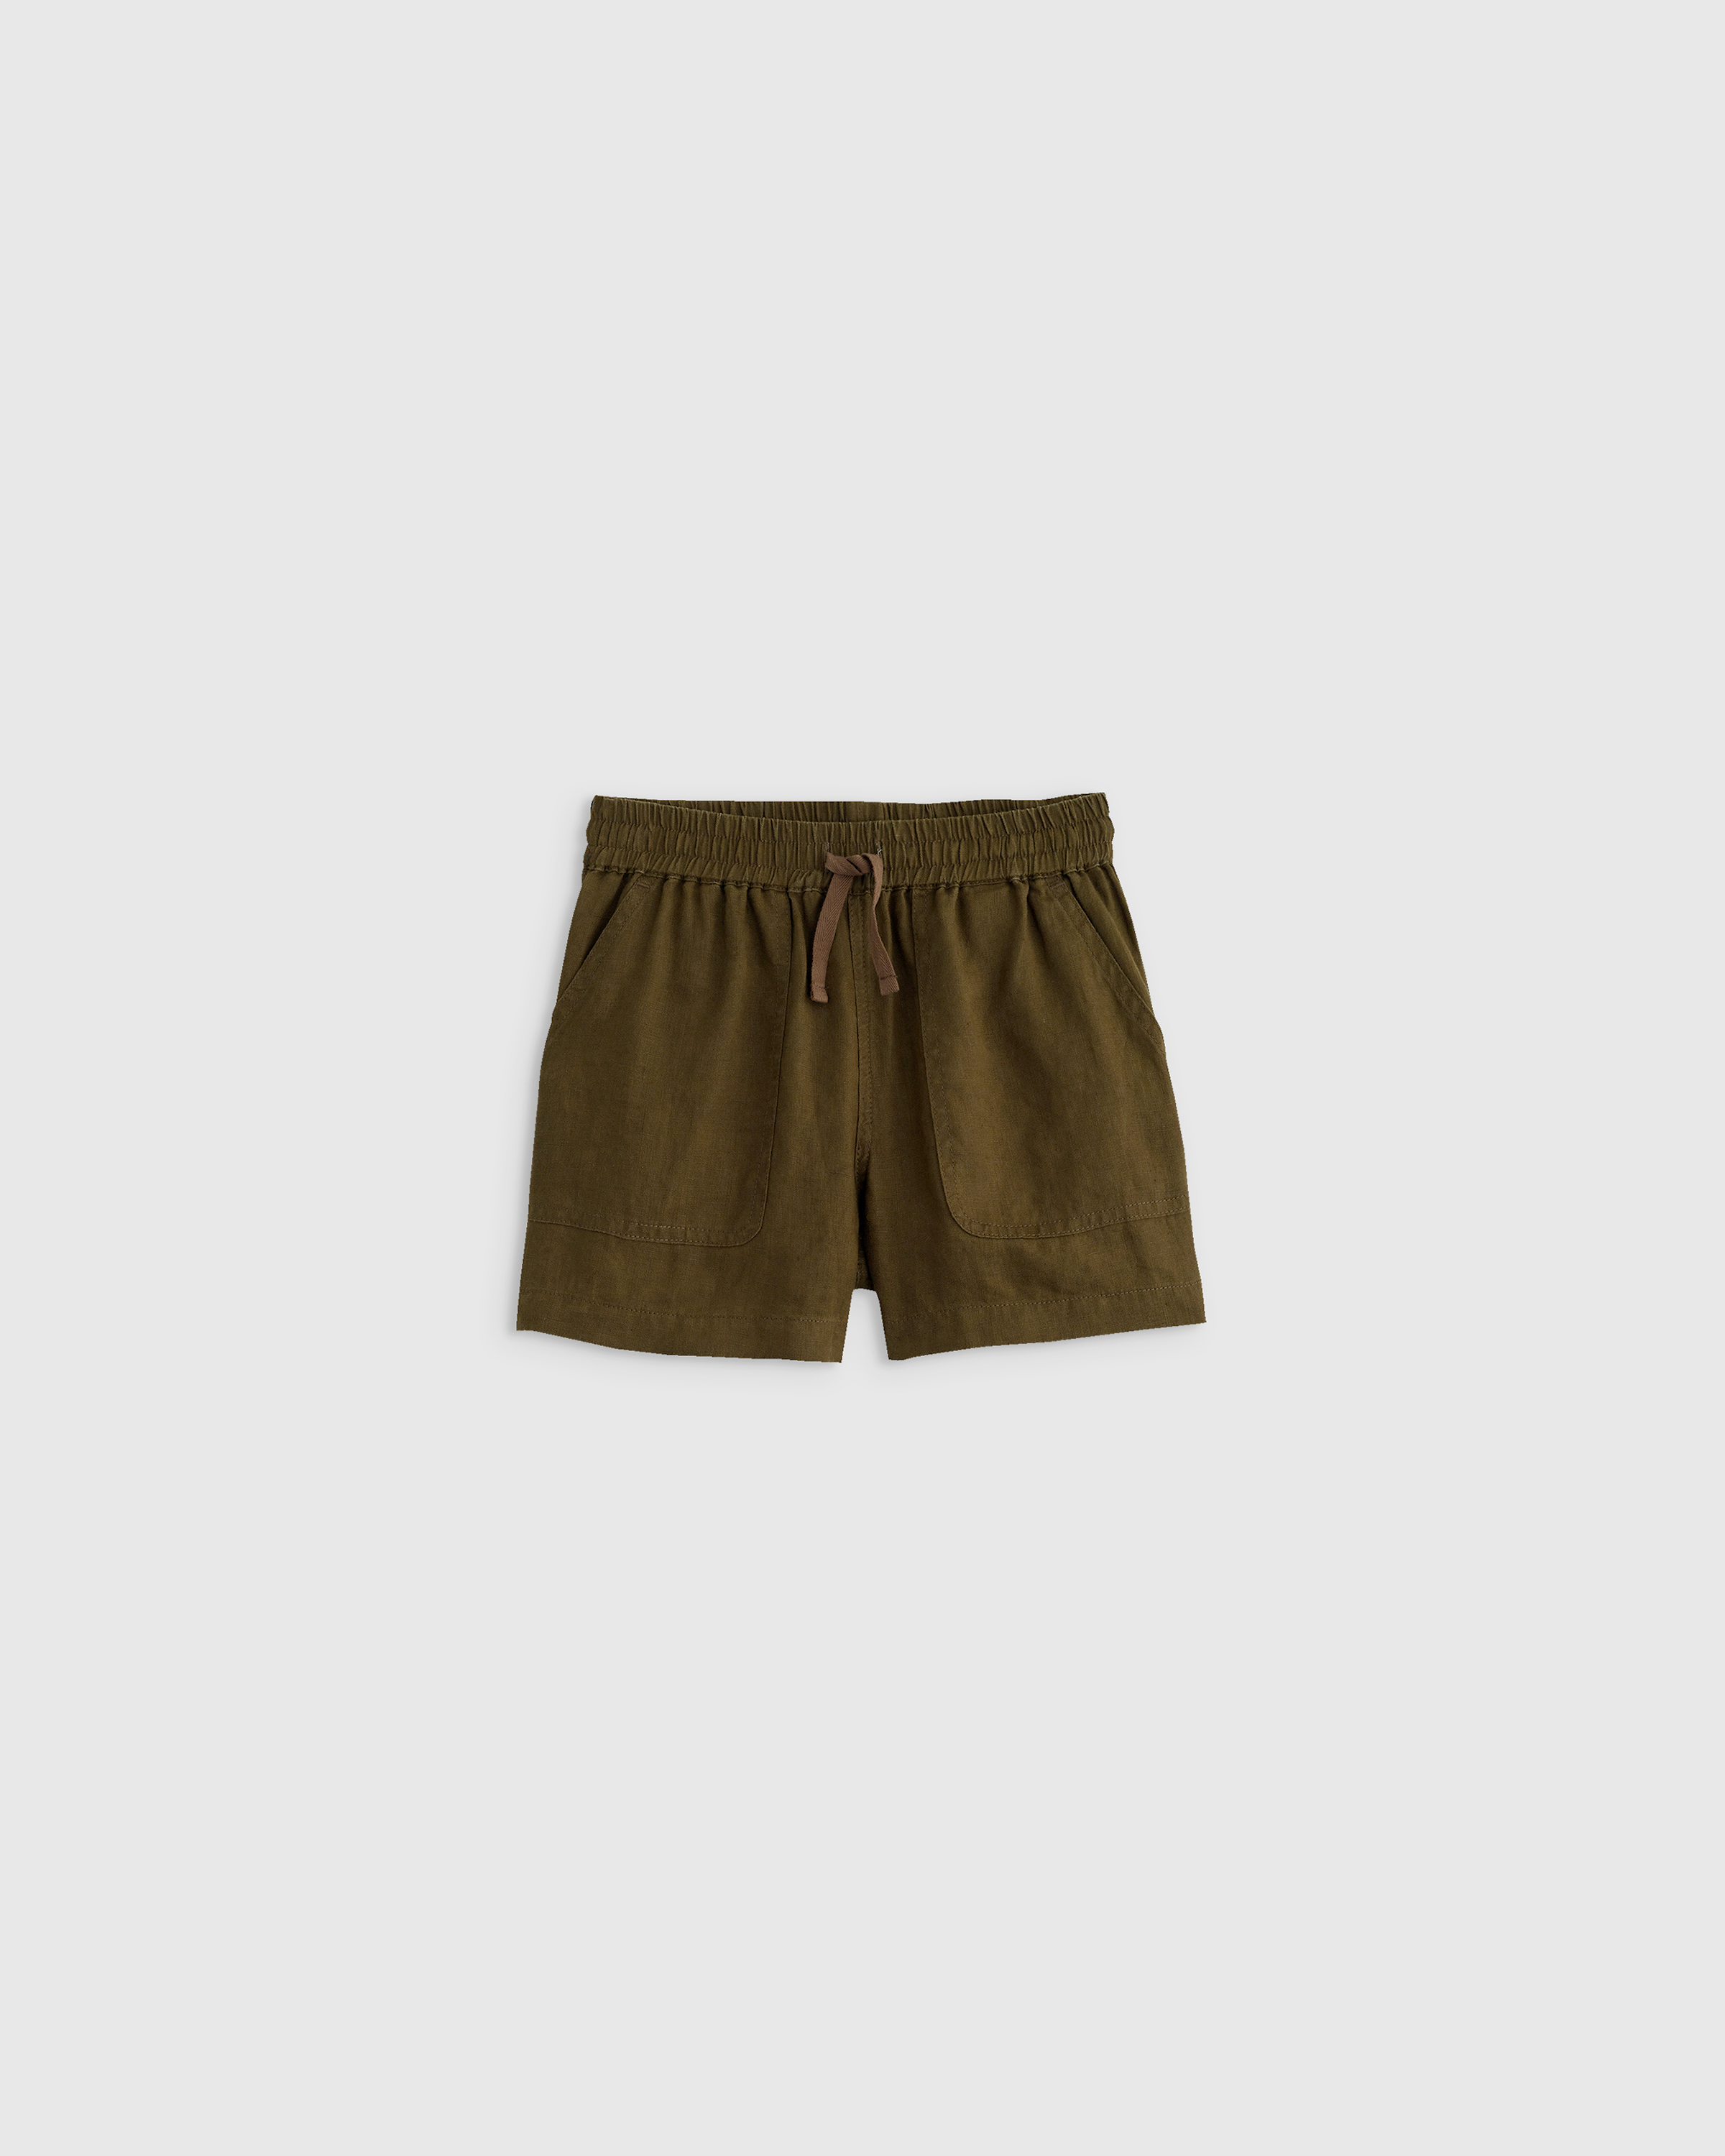 Quince 100% European Linen Drawstring Shorts In Martini Olive